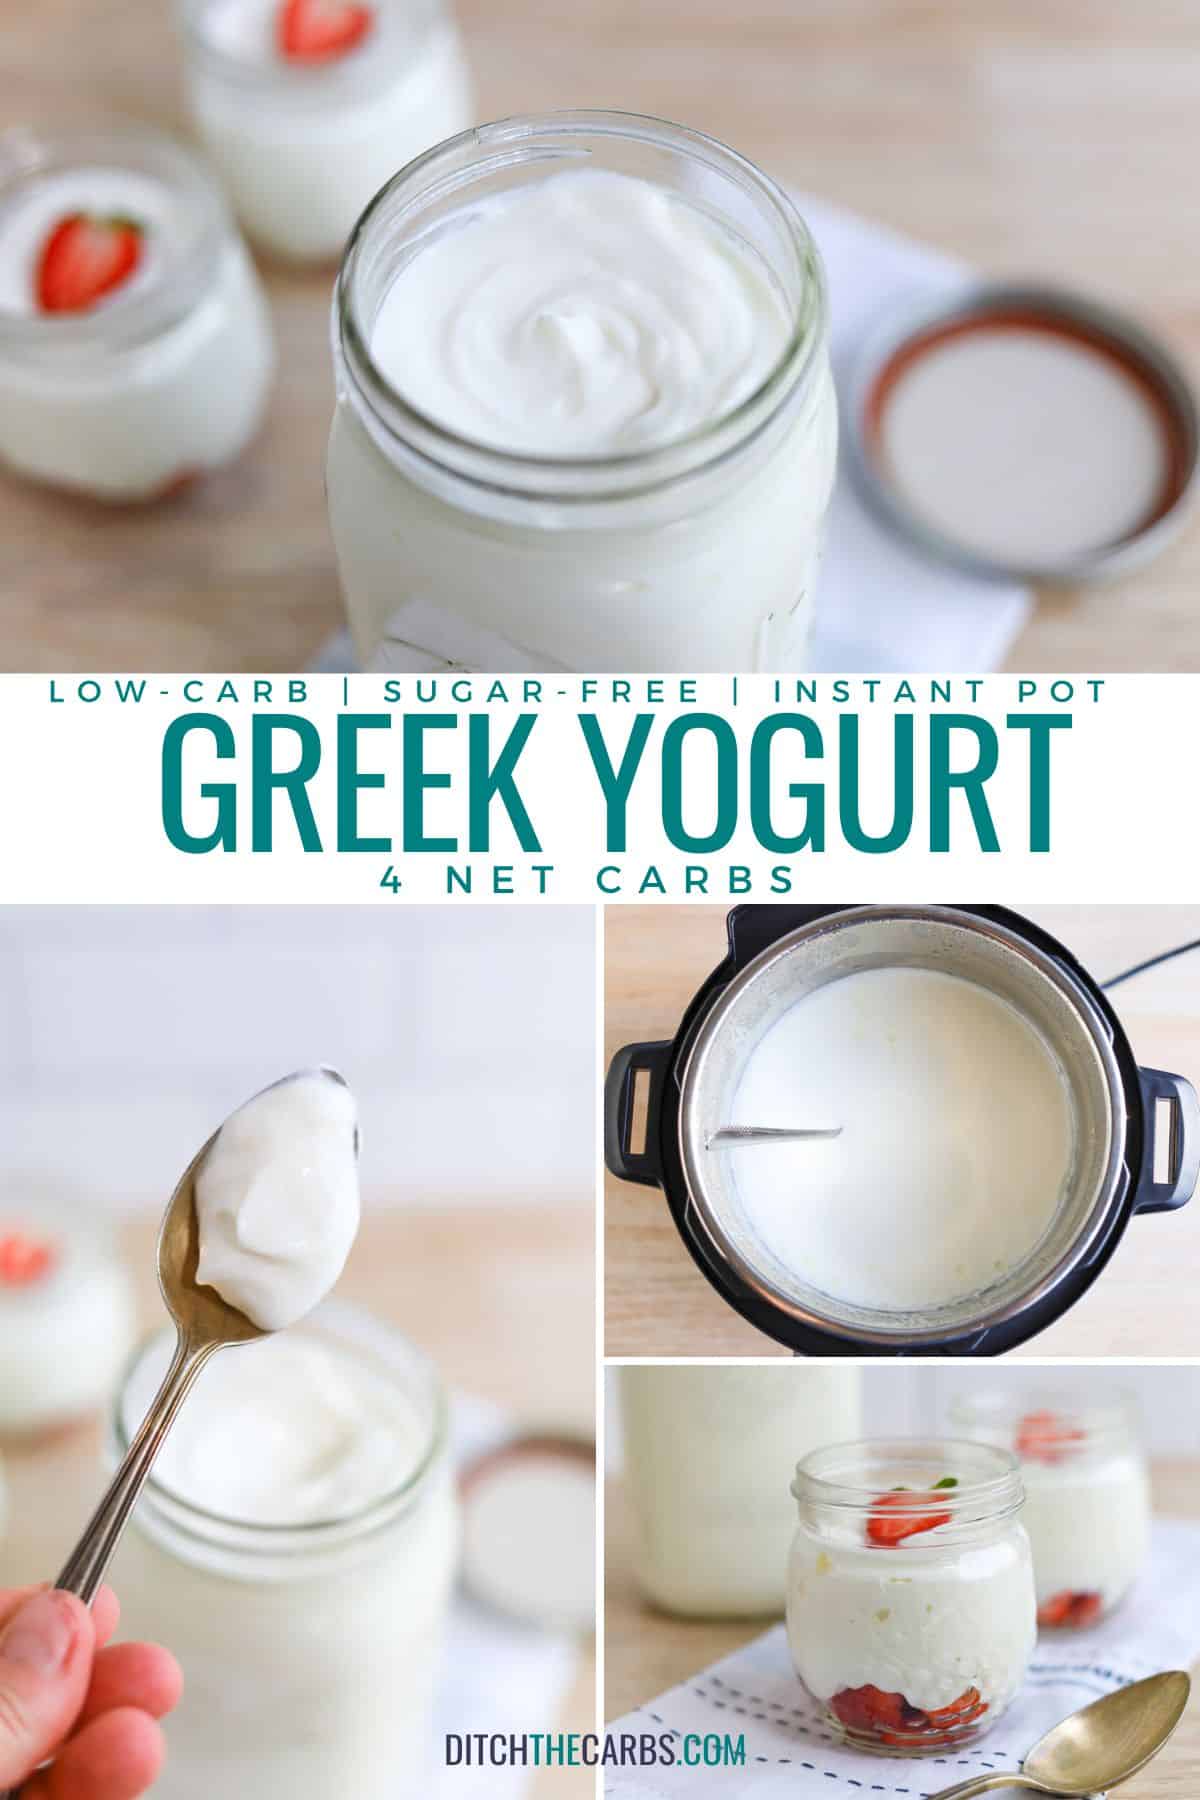 A collage showing low-carb Greek yogurt being made at various stages.